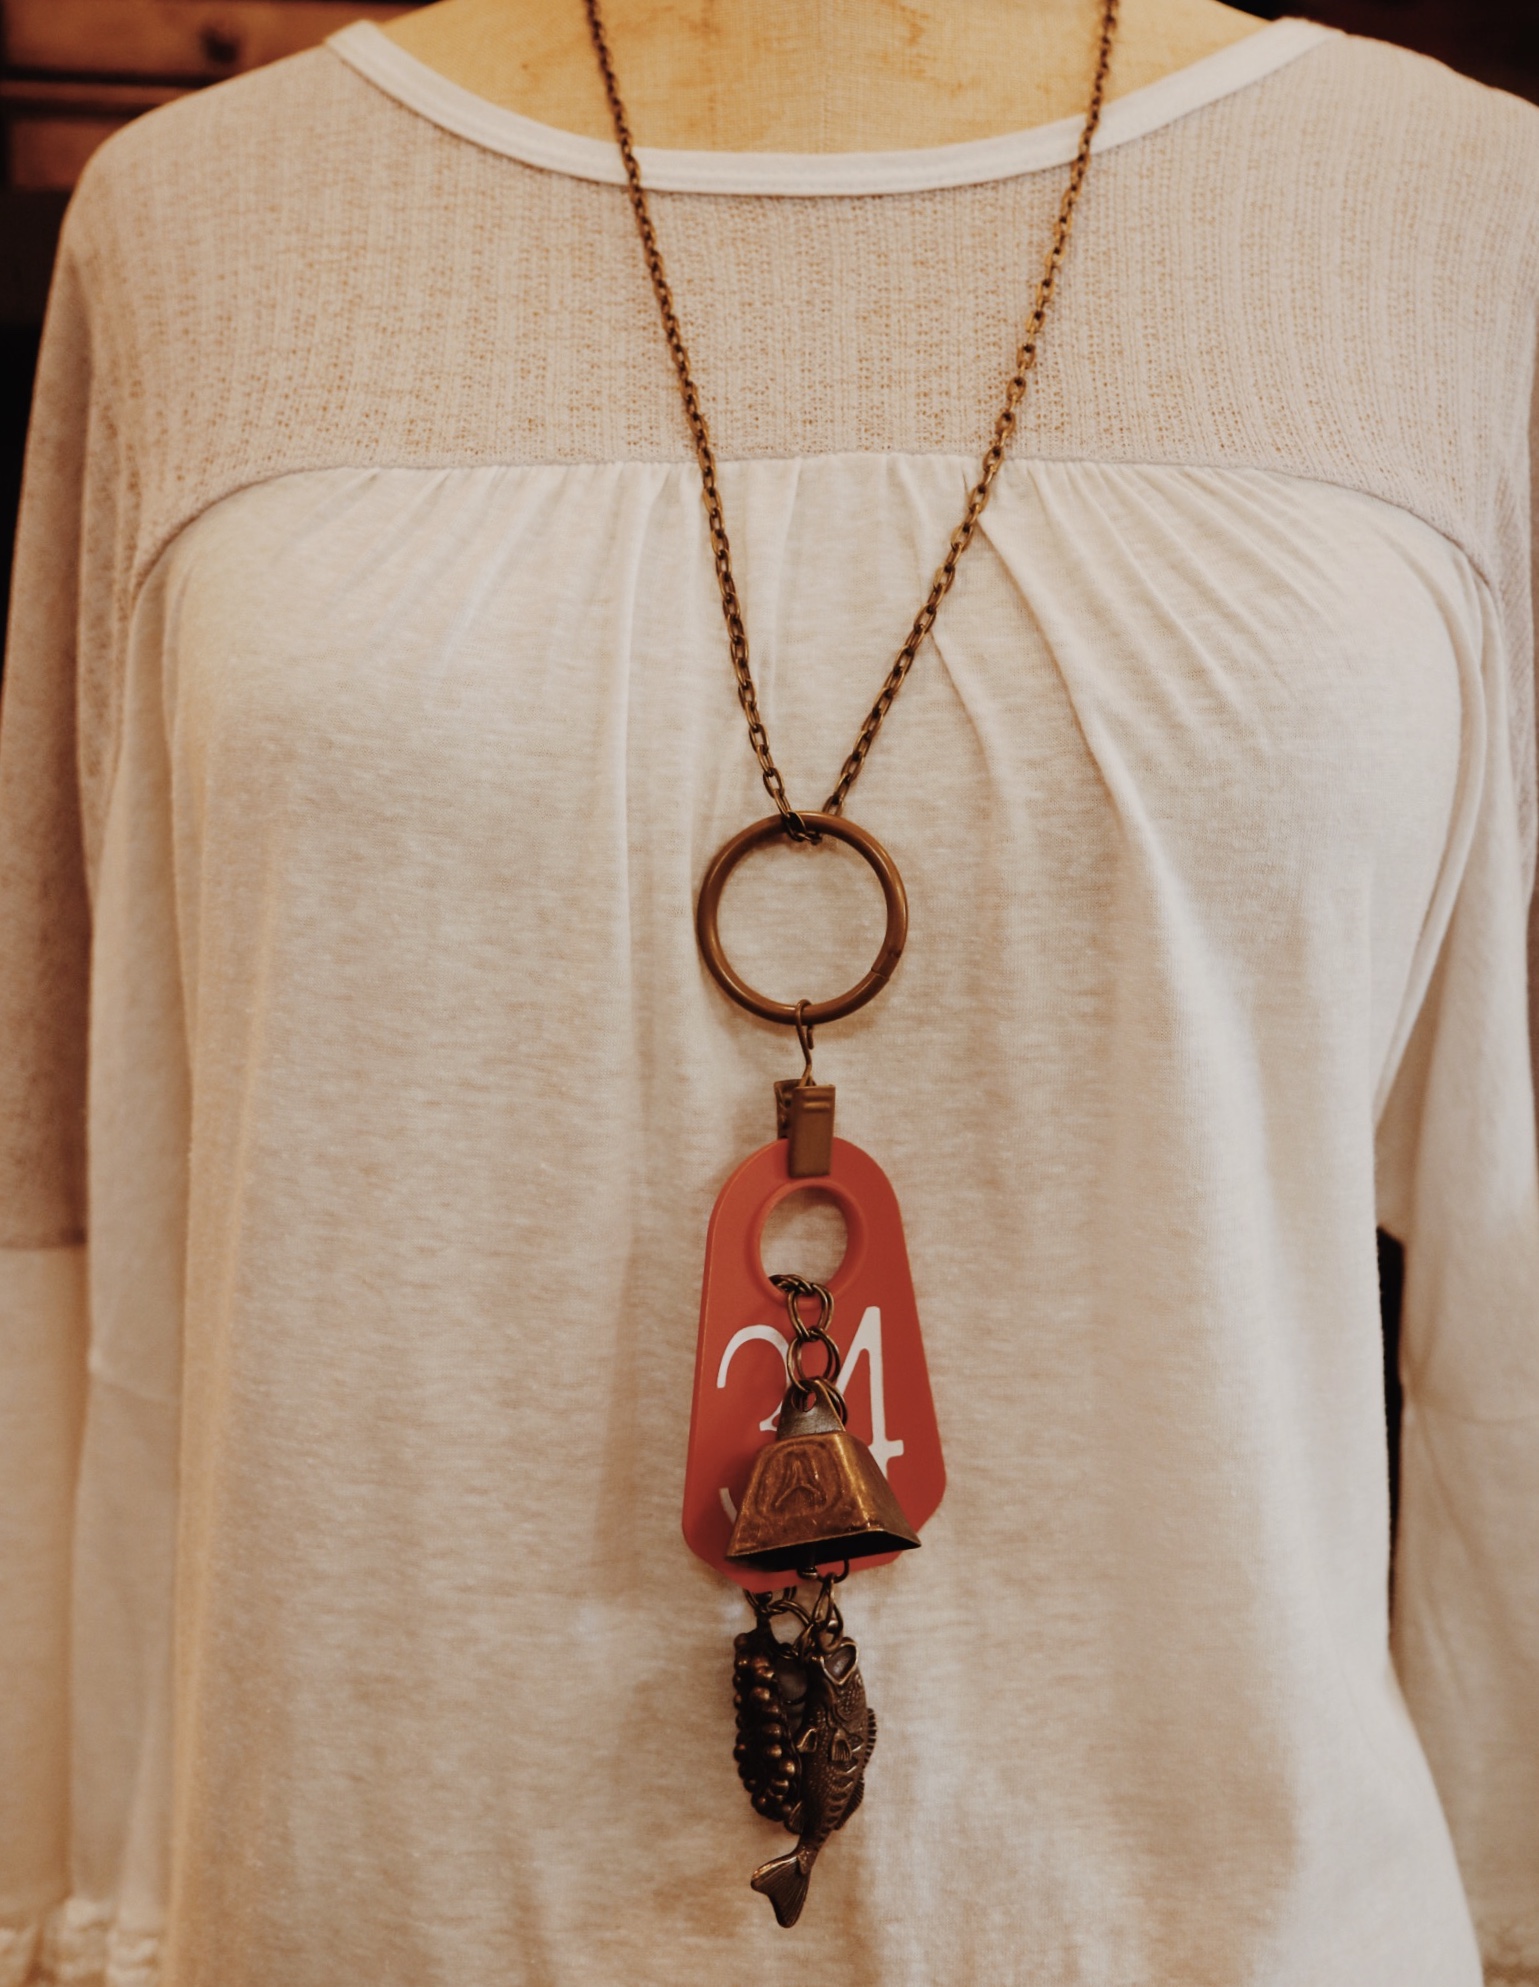 This one of a kind, hand made necklace is on a 29 inch chain!